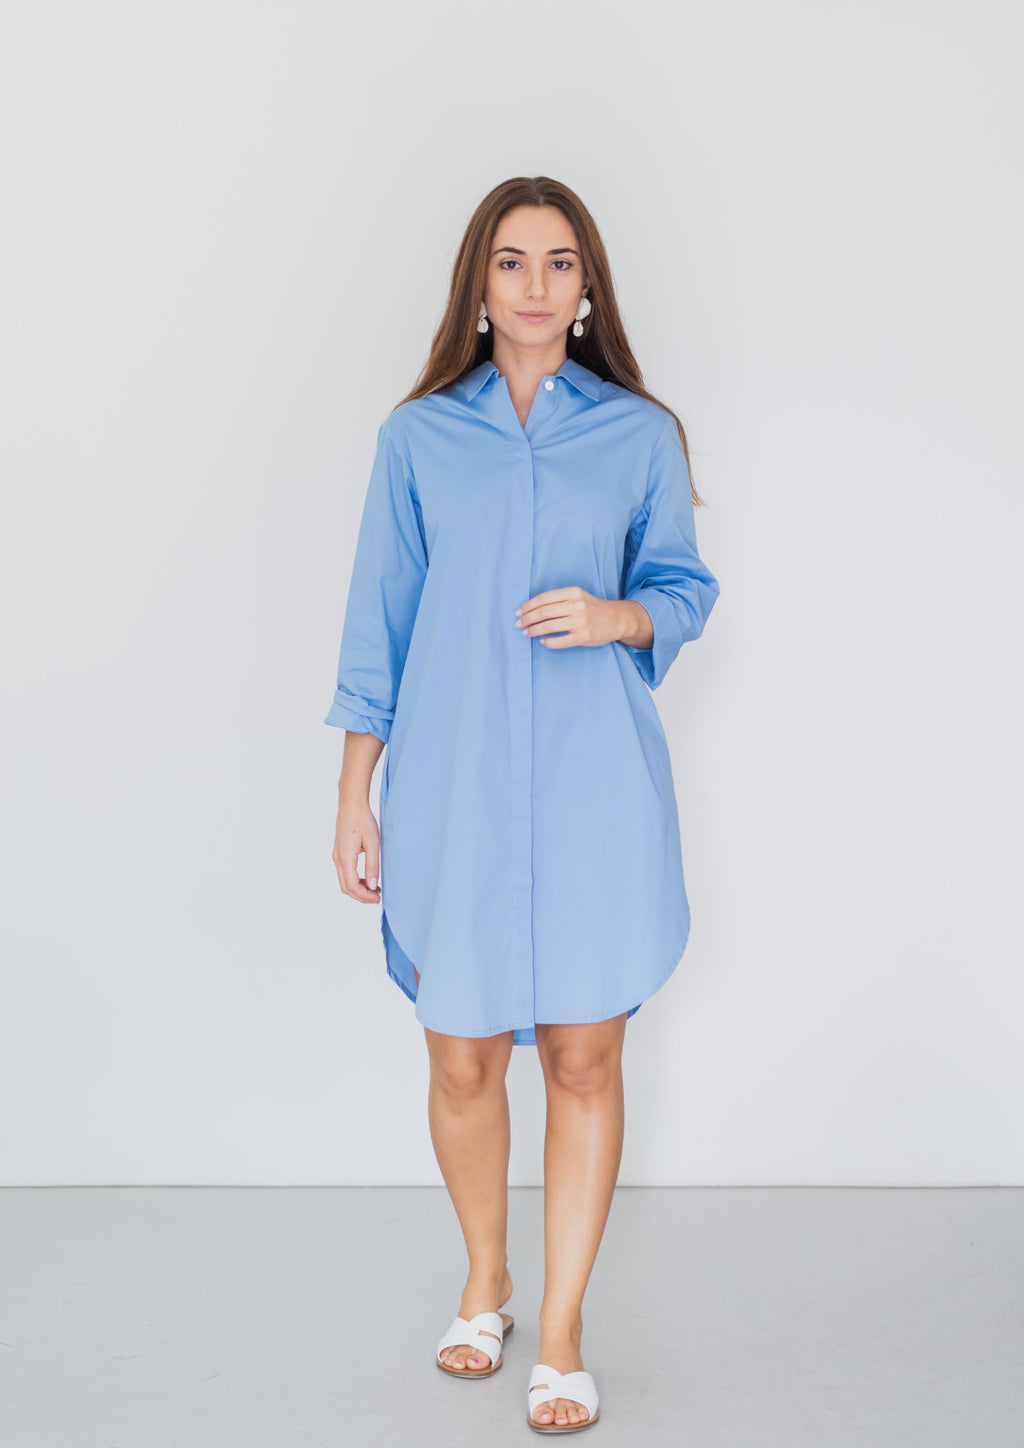 Reversible shirt dress in skyblue. Can be worn as a shirt, dress or jacket. With two collars, roll-up sleeves, practical pockets and buttoned full-length opening.  